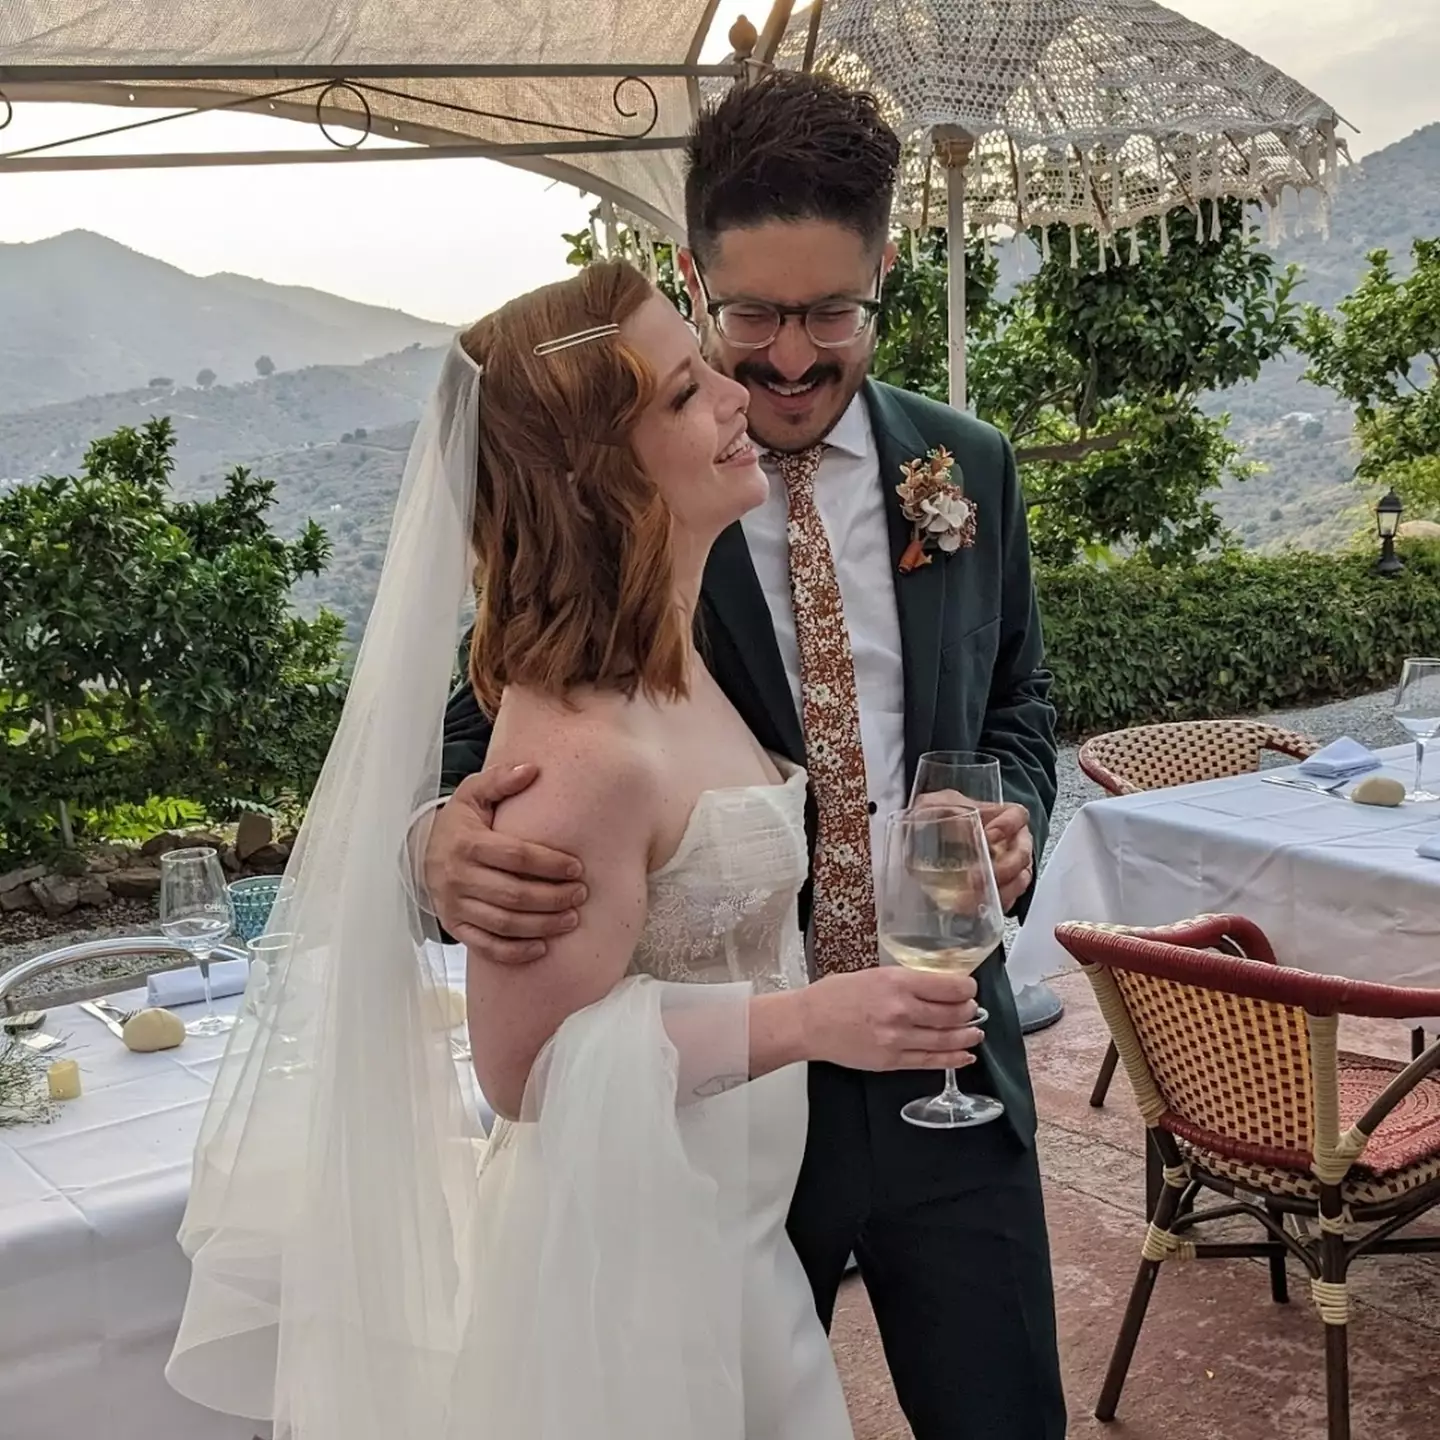 The pair recently got married in Spain.